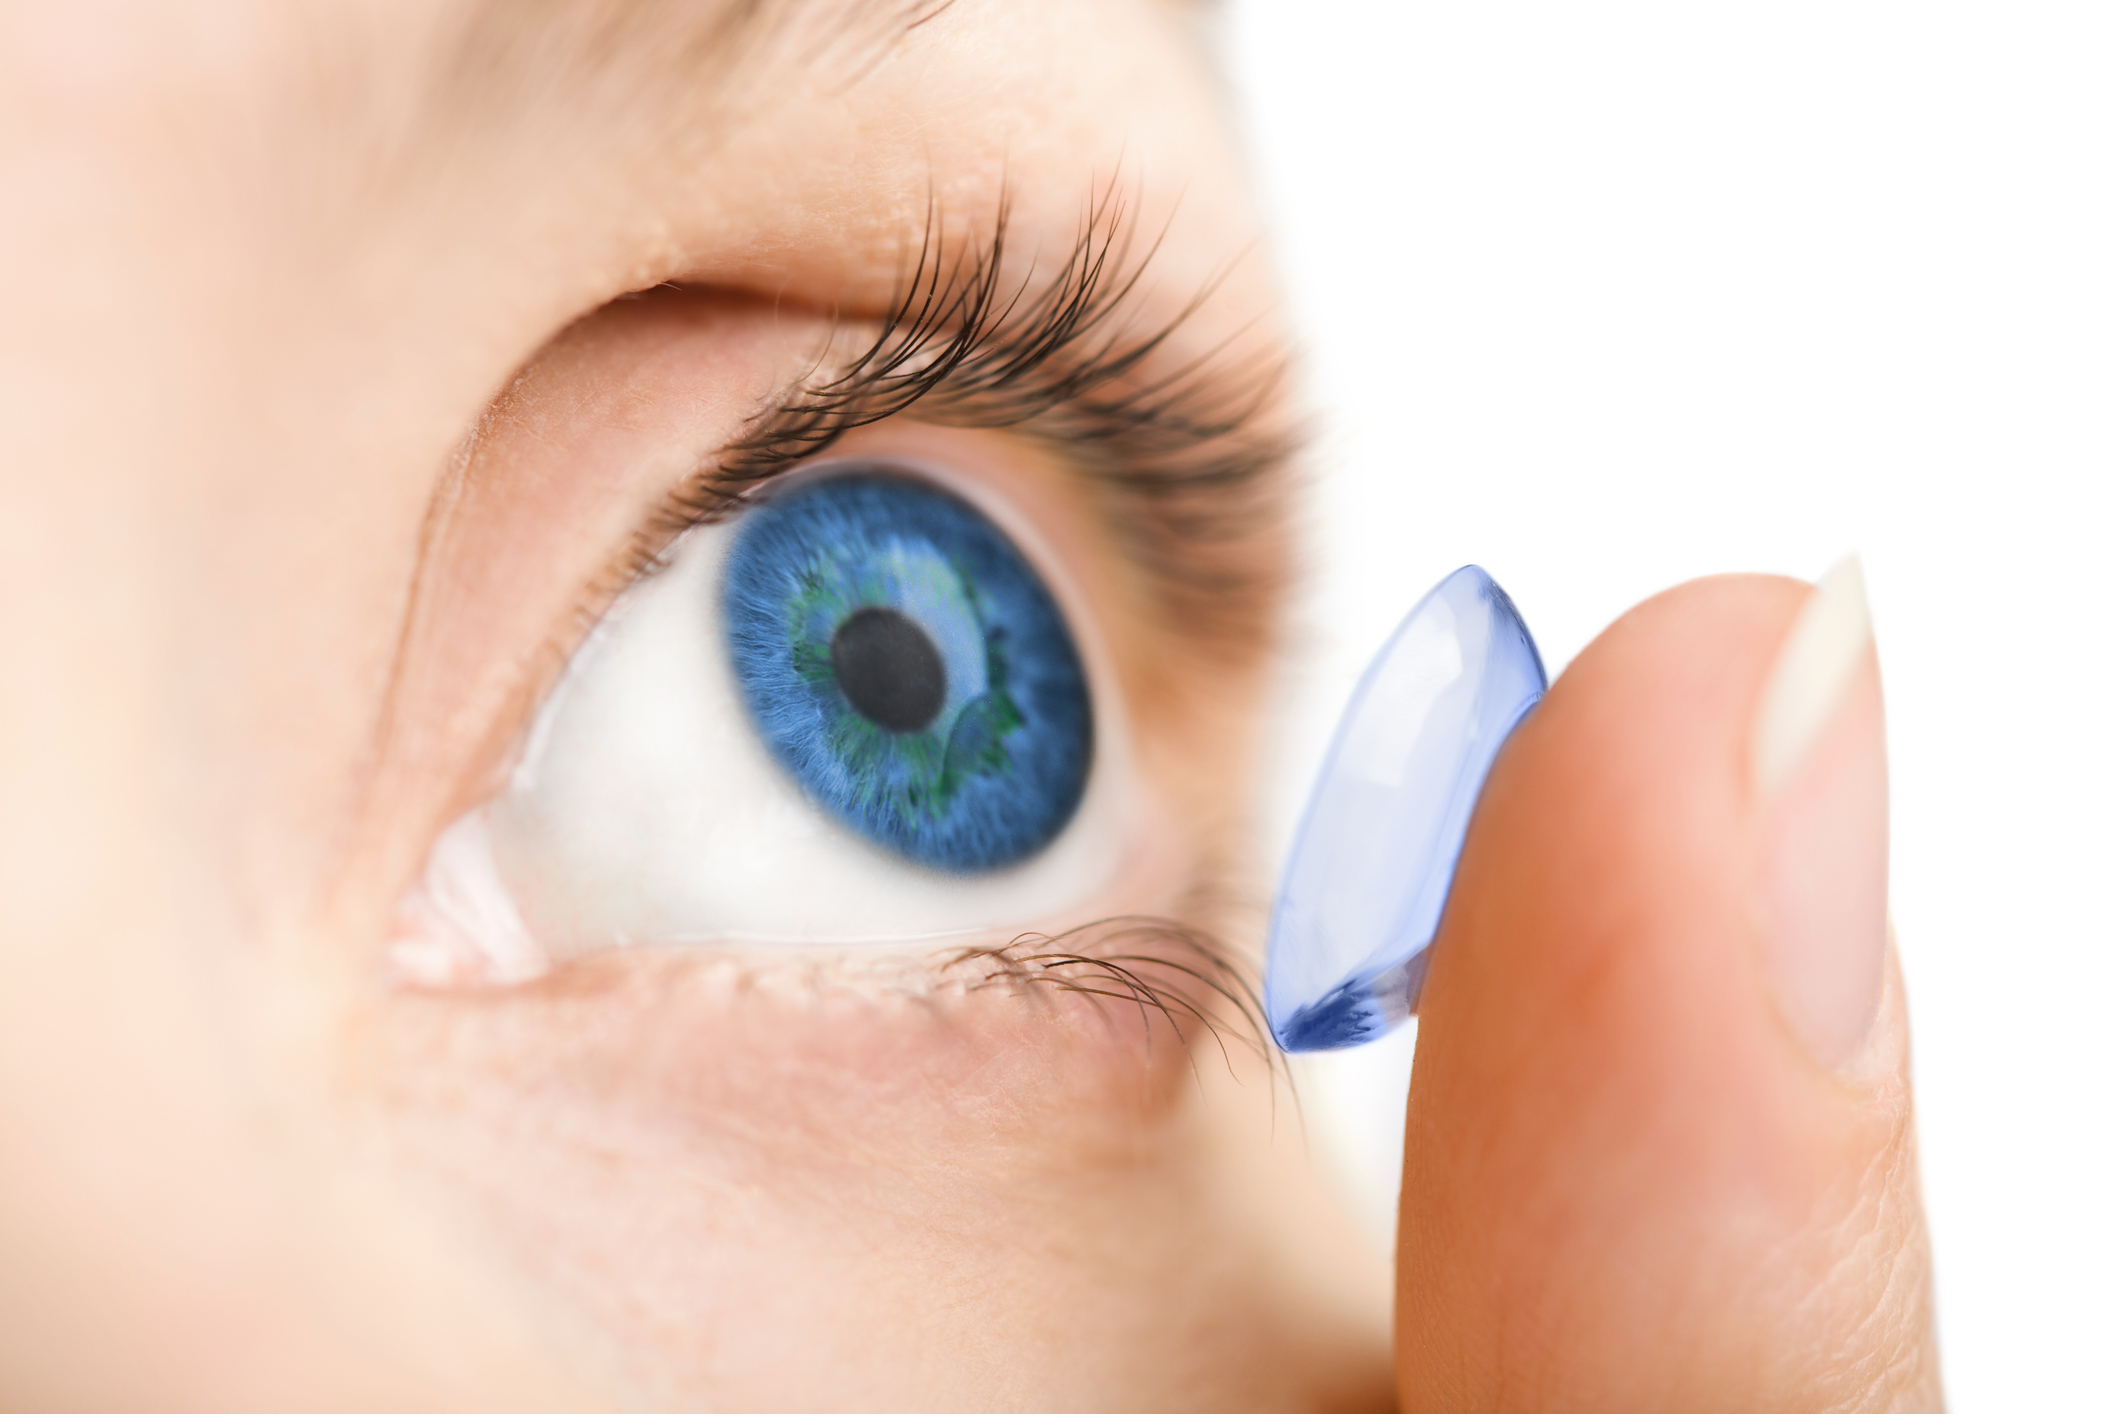 infuse contact lenses